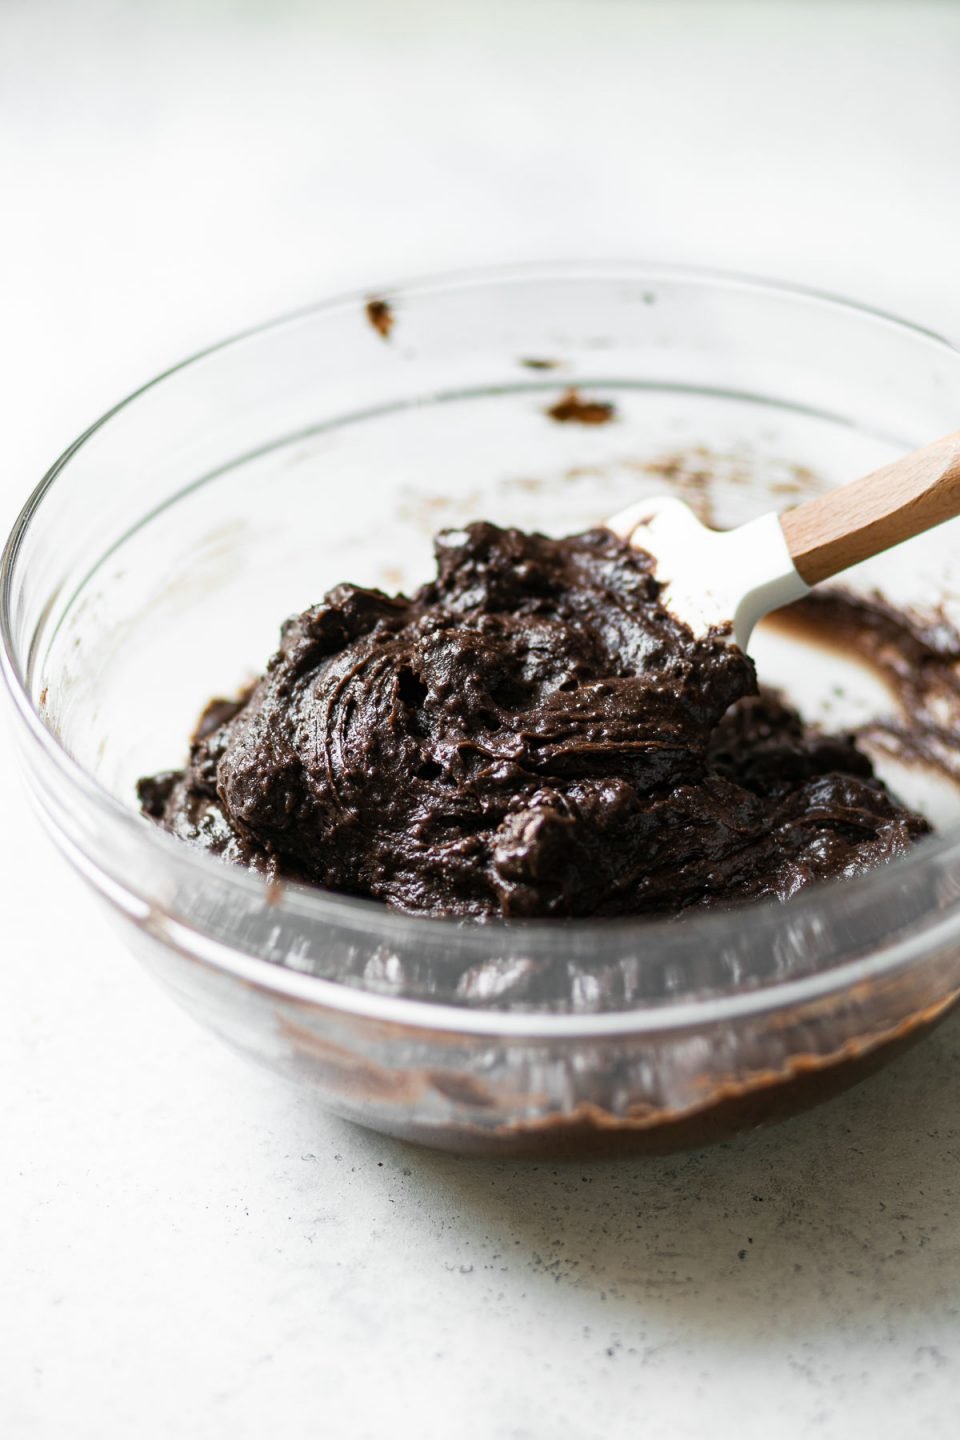 Brownie batter made with boxed brownie mix and added box brownie hacks prepped in a clear glass mixing bowl. A white spatula with a wooden handle is stuck inside the brownie batter. The mixing bowls sits atop a white surface.